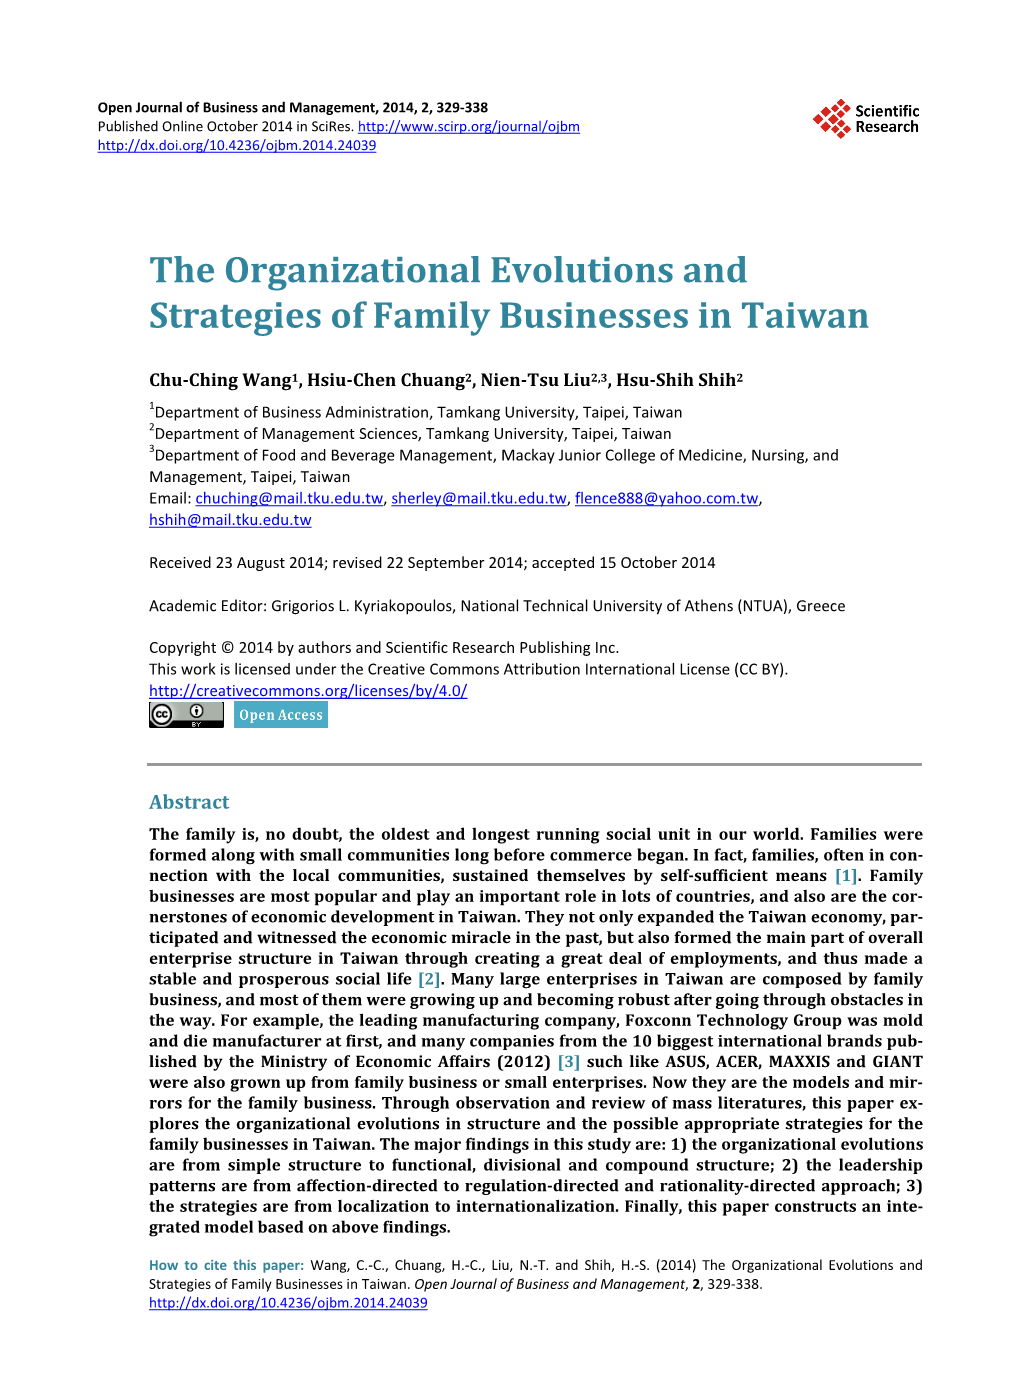 The Organizational Evolutions and Strategies of Family Businesses in Taiwan